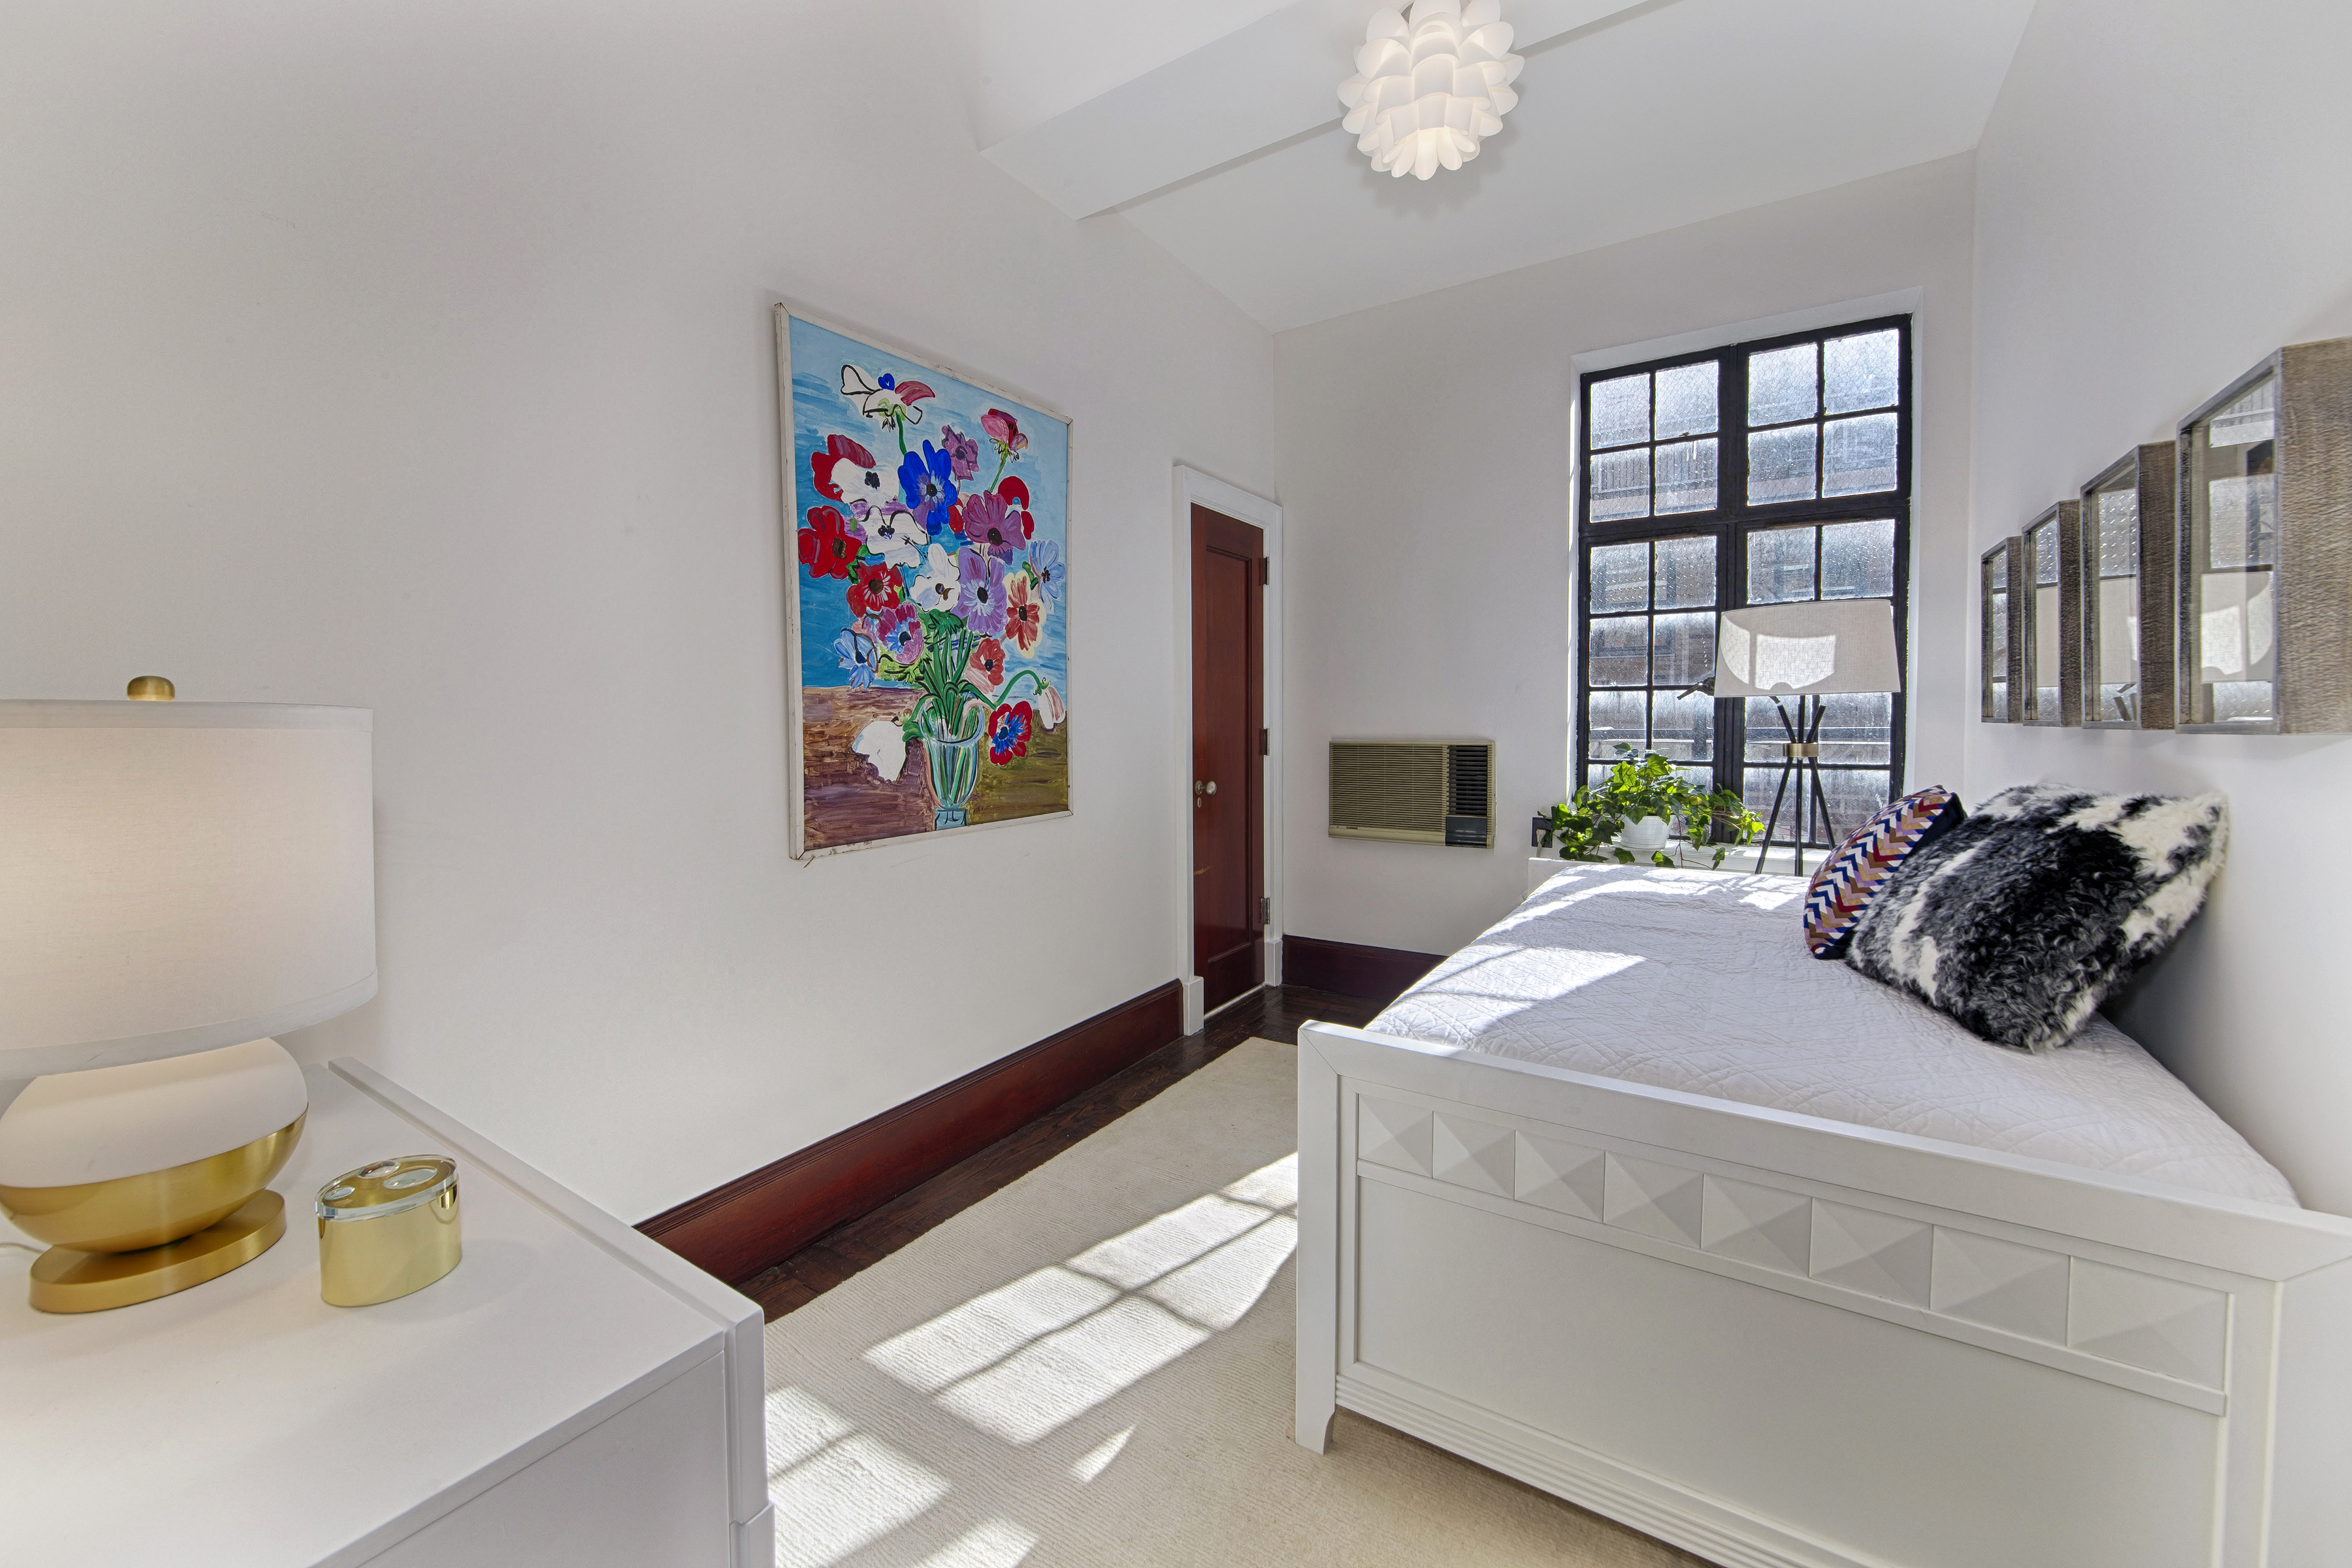 205 East 69th Street, co-ops, cool listings, David Wolkowsky, penthouses